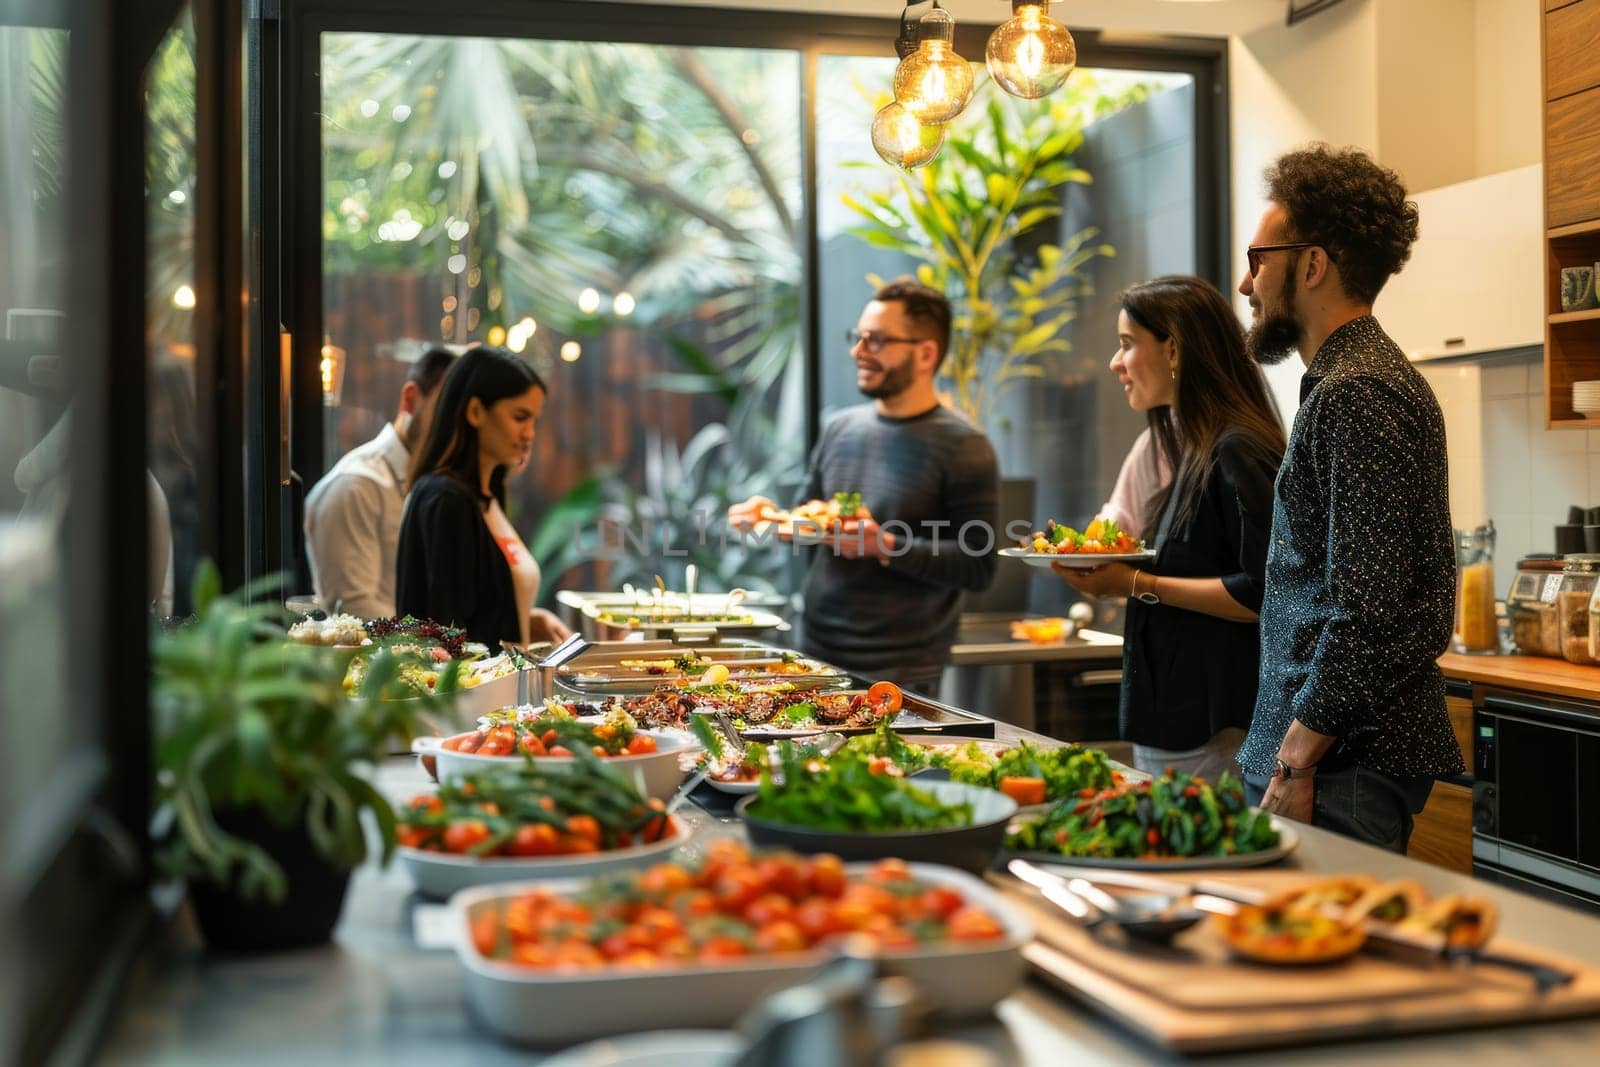 A group of people are gathered around a buffet table filled with food. Scene is social and friendly, as everyone is enjoying the food and each other's company